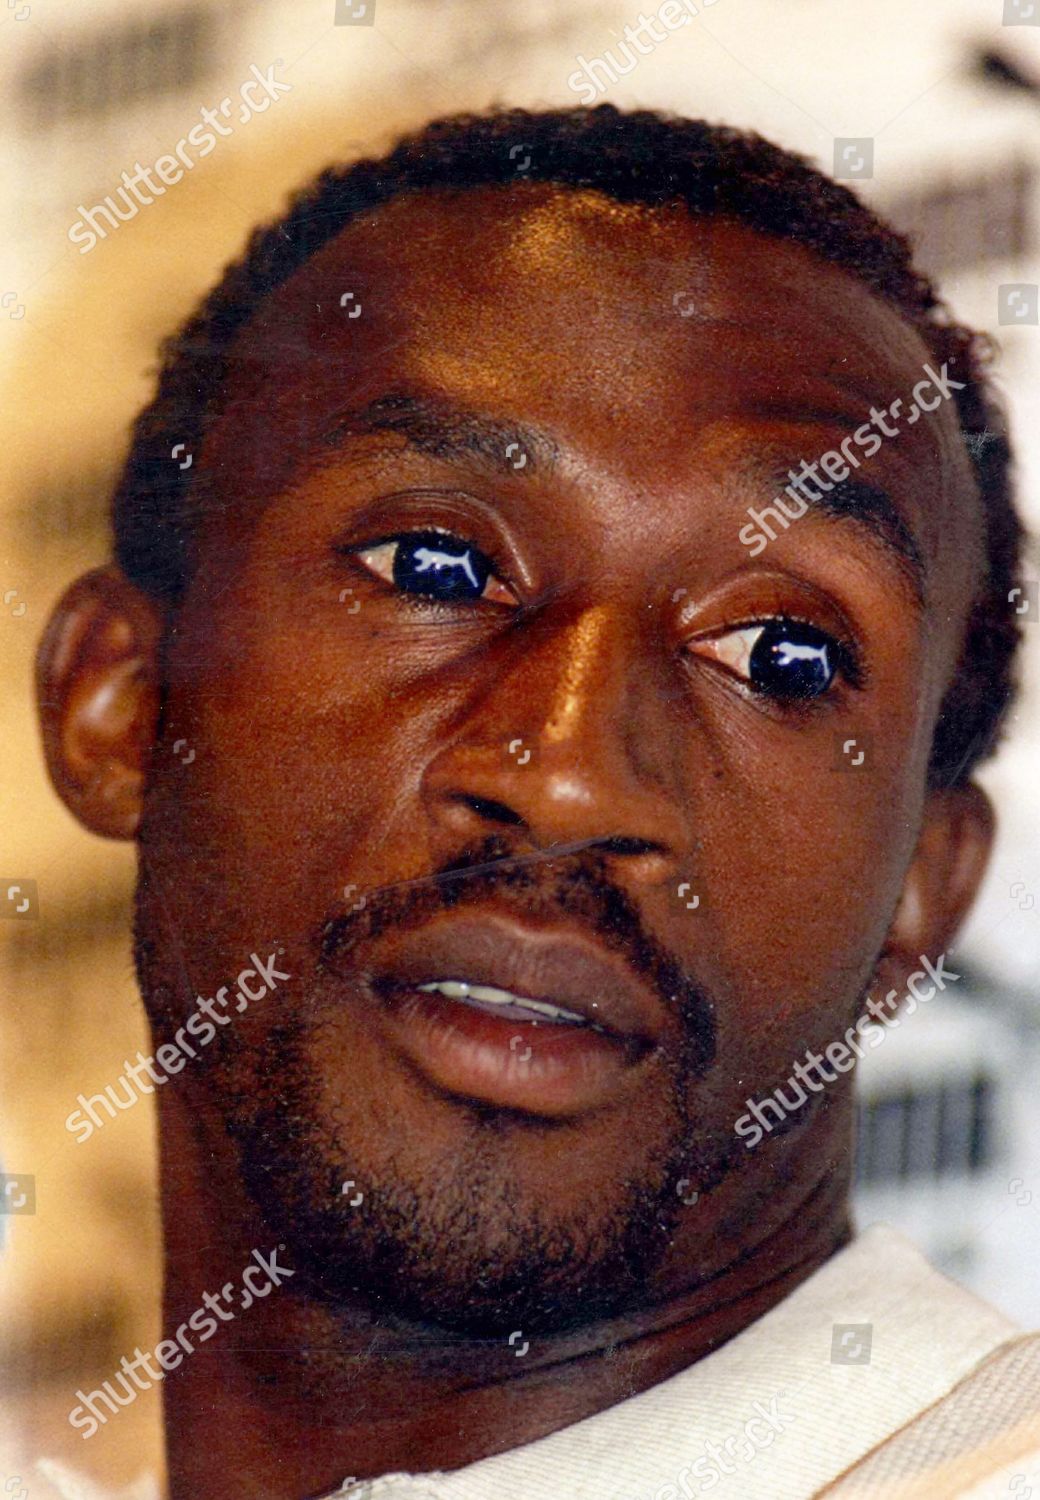 Linford Christie Athlete 1996 Cats Eyes 